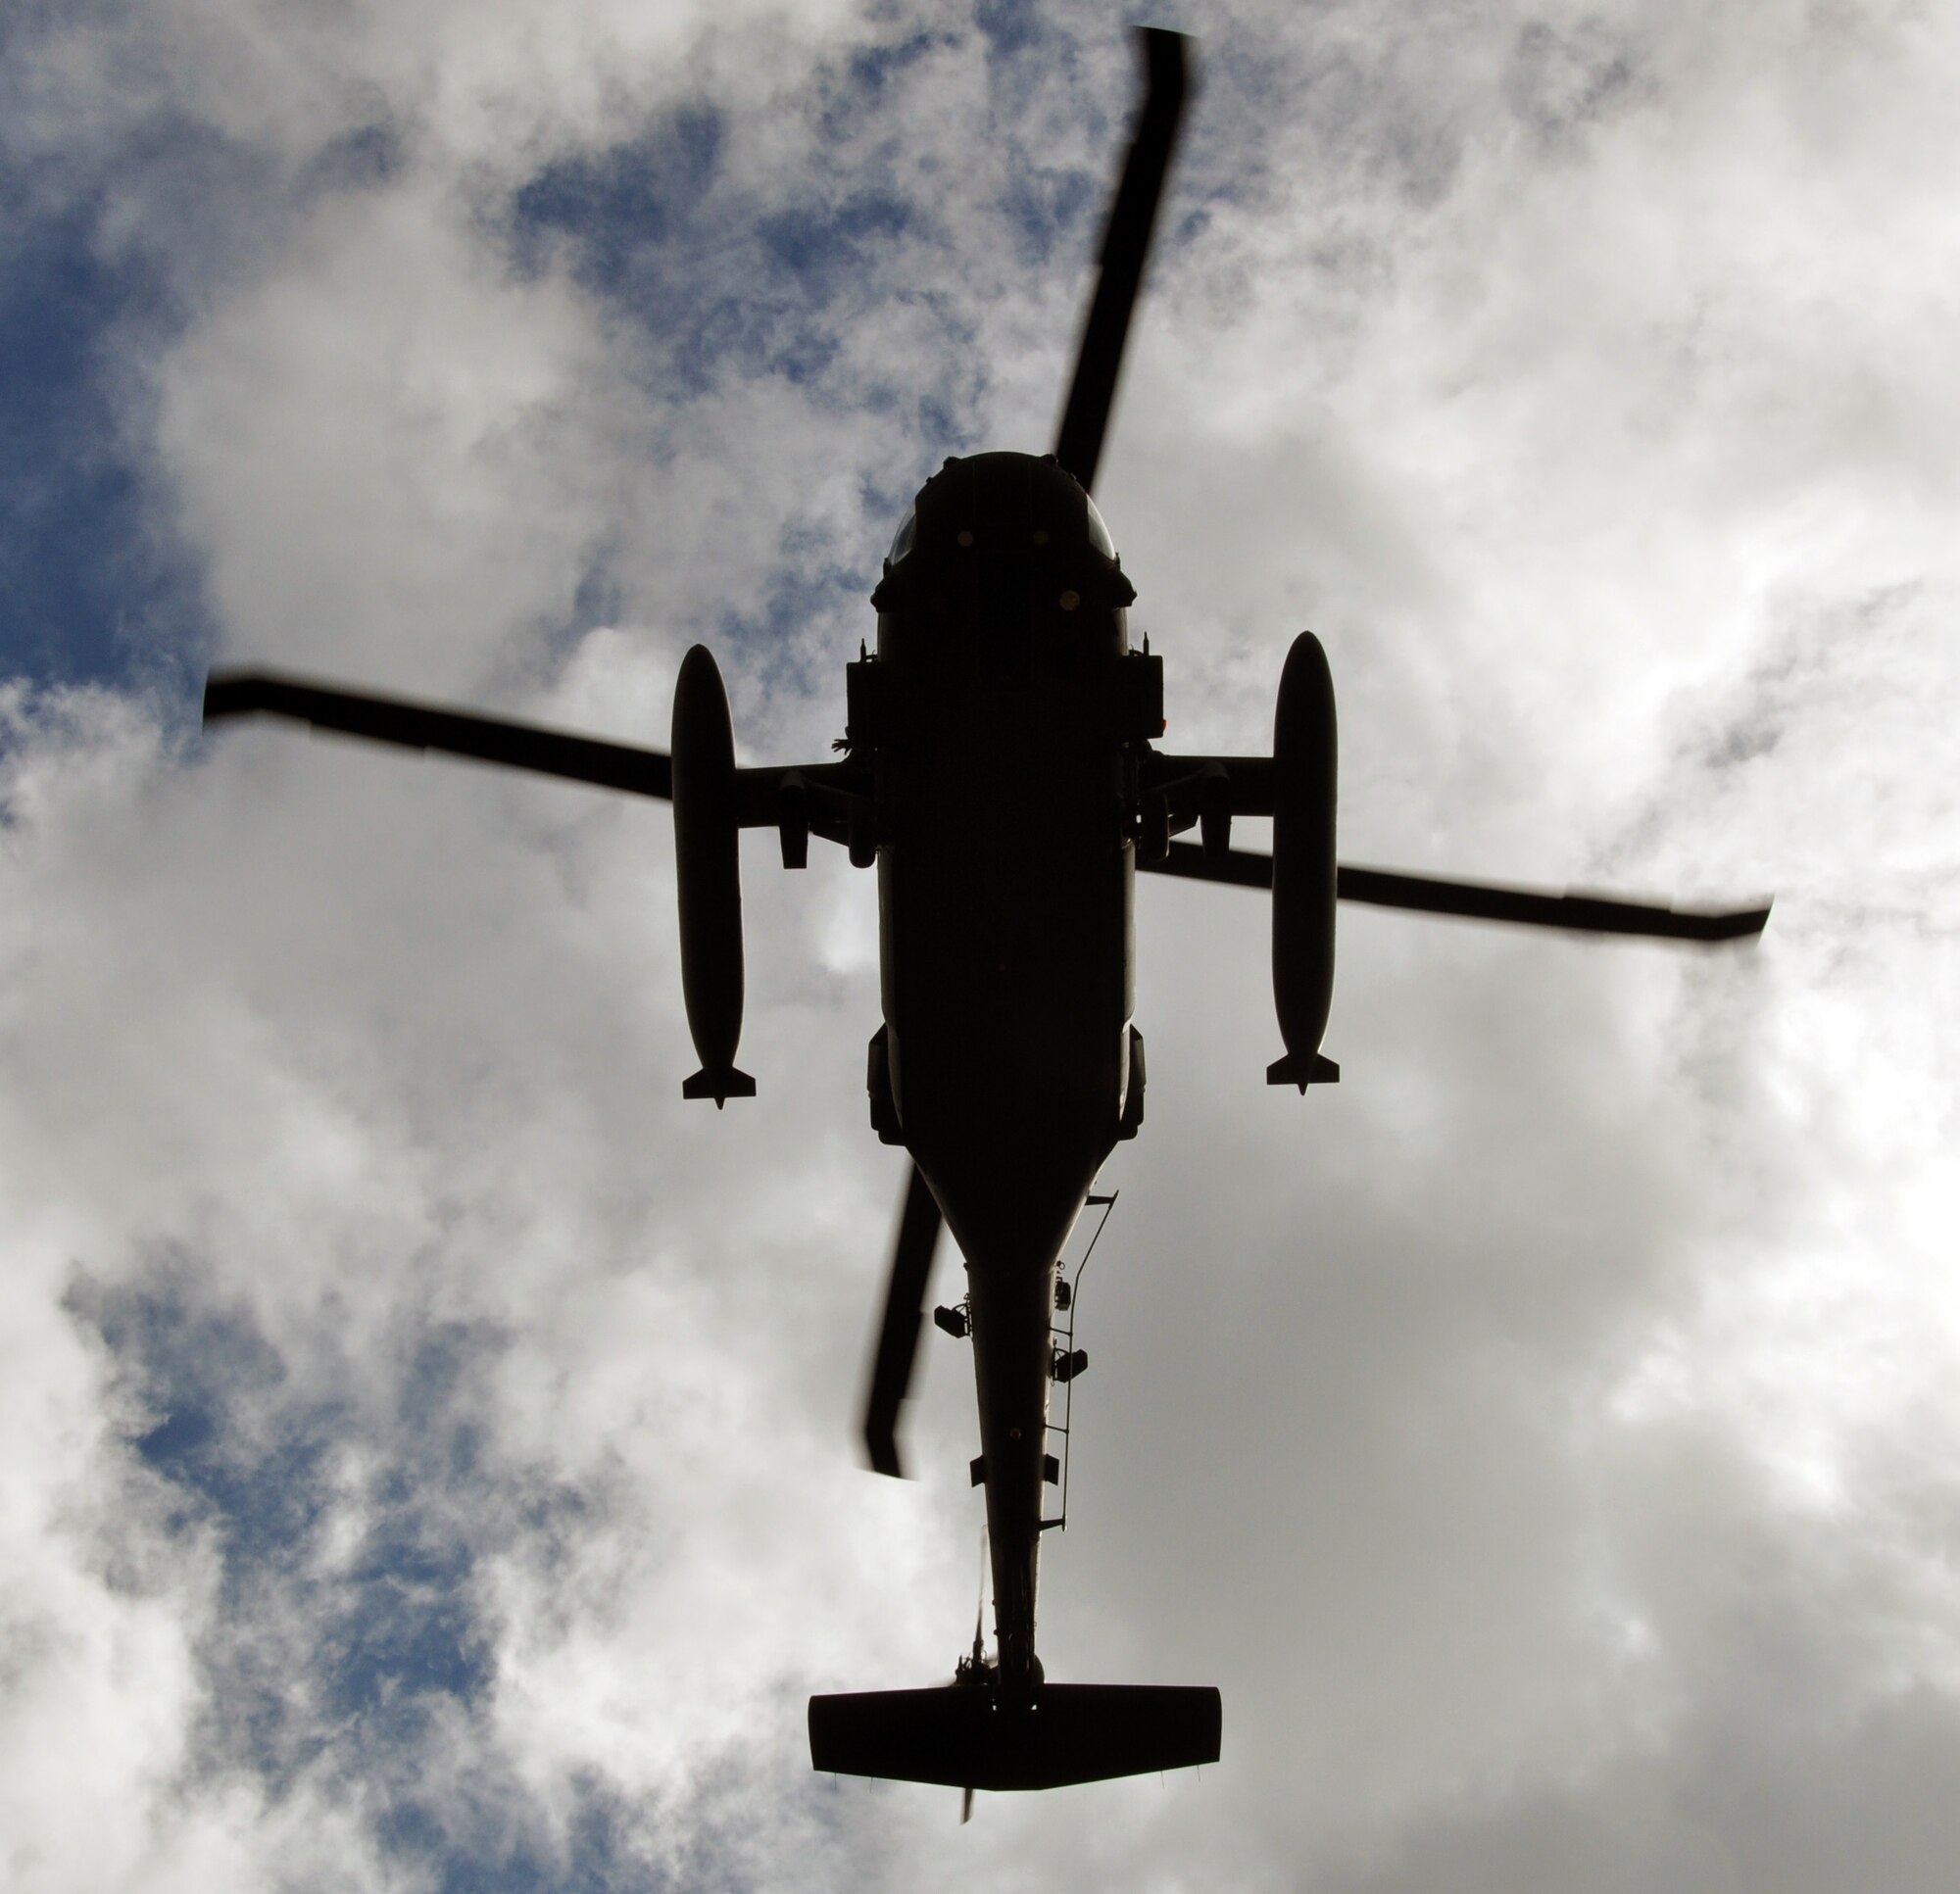 A UH-60 Blackhawk helicopter assigned to Joint Task Force-Bravo's 1-228th Aviation Regiment flies overhead during an operation as part of Joint Task Force-Bravo's Culminating Exercise (CULEX), Dec. 3, 2013.  For the CULEX, more than 90 members of Joint Task Force-Bravo deployed to the Department of Gracias a Dios, Honduras, to conduct both real-world and exercise operations.  (U.S. Air Force photo by Capt. Zach Anderson)